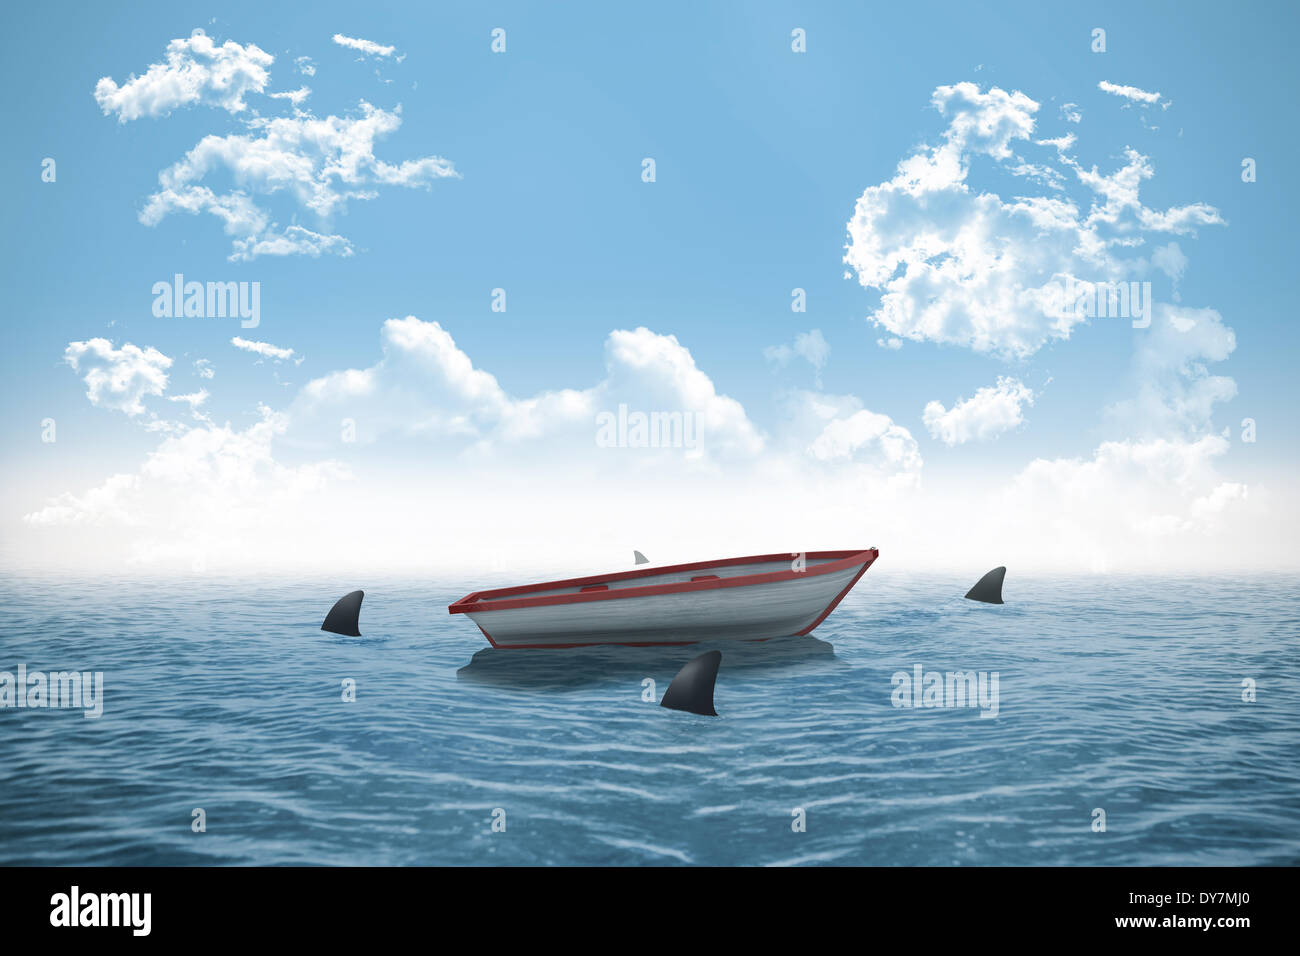 Sharks circling small boat in the ocean Stock Photo